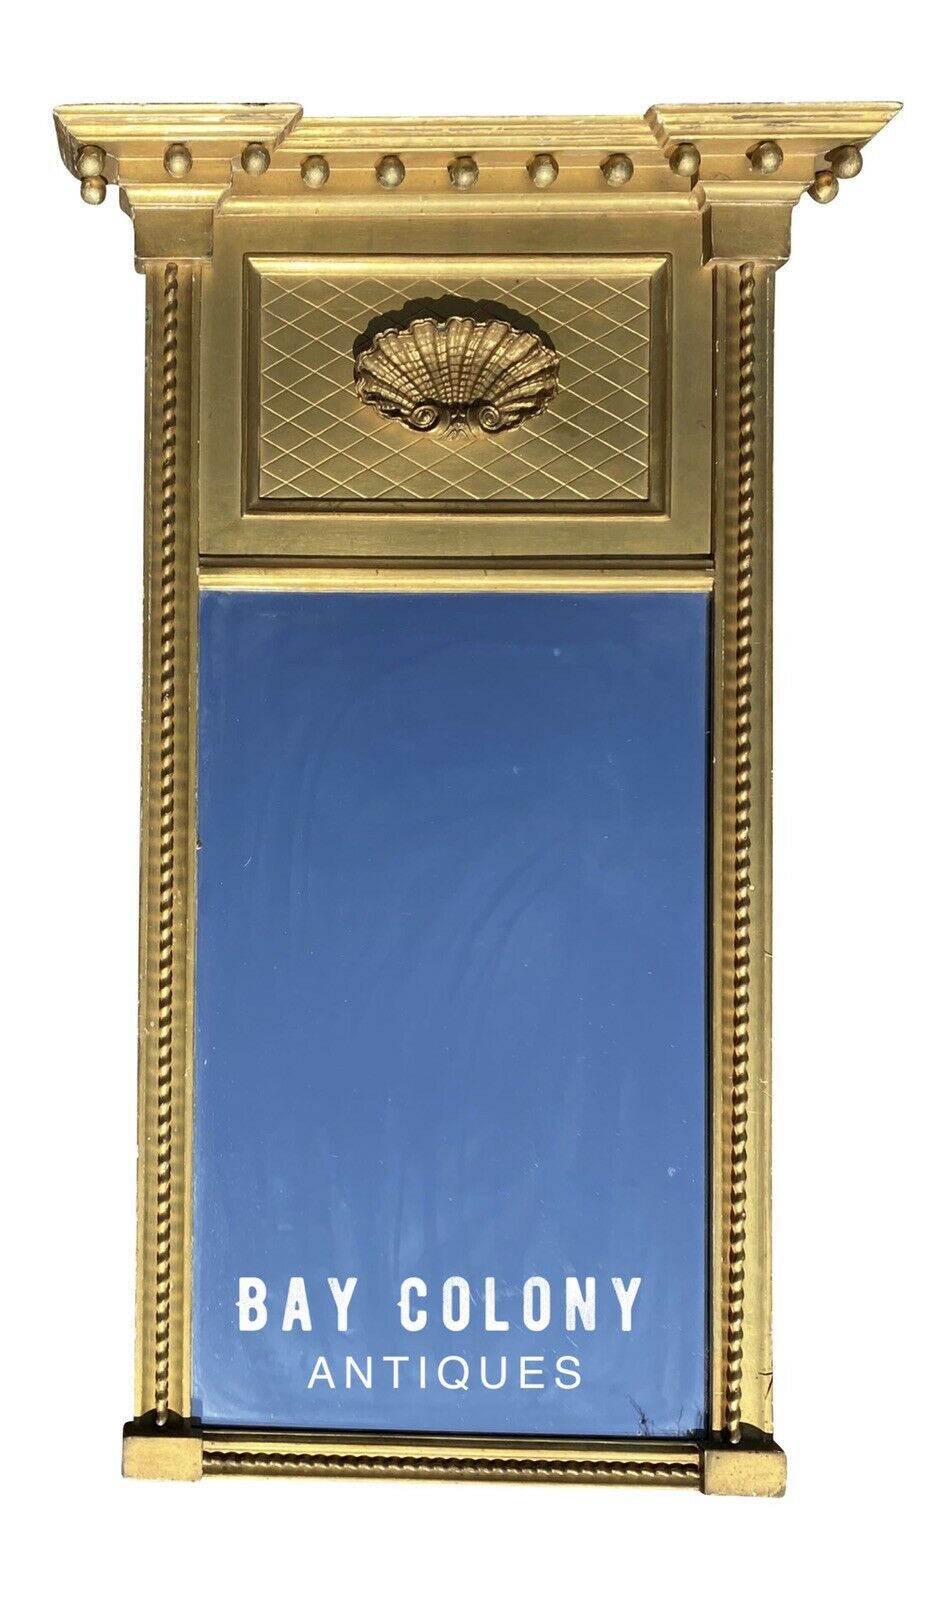 20TH C FEDERAL ANTIQUE STYLE SHELL CARVED BORGHESE GOLD TABERNACLE MIRROR